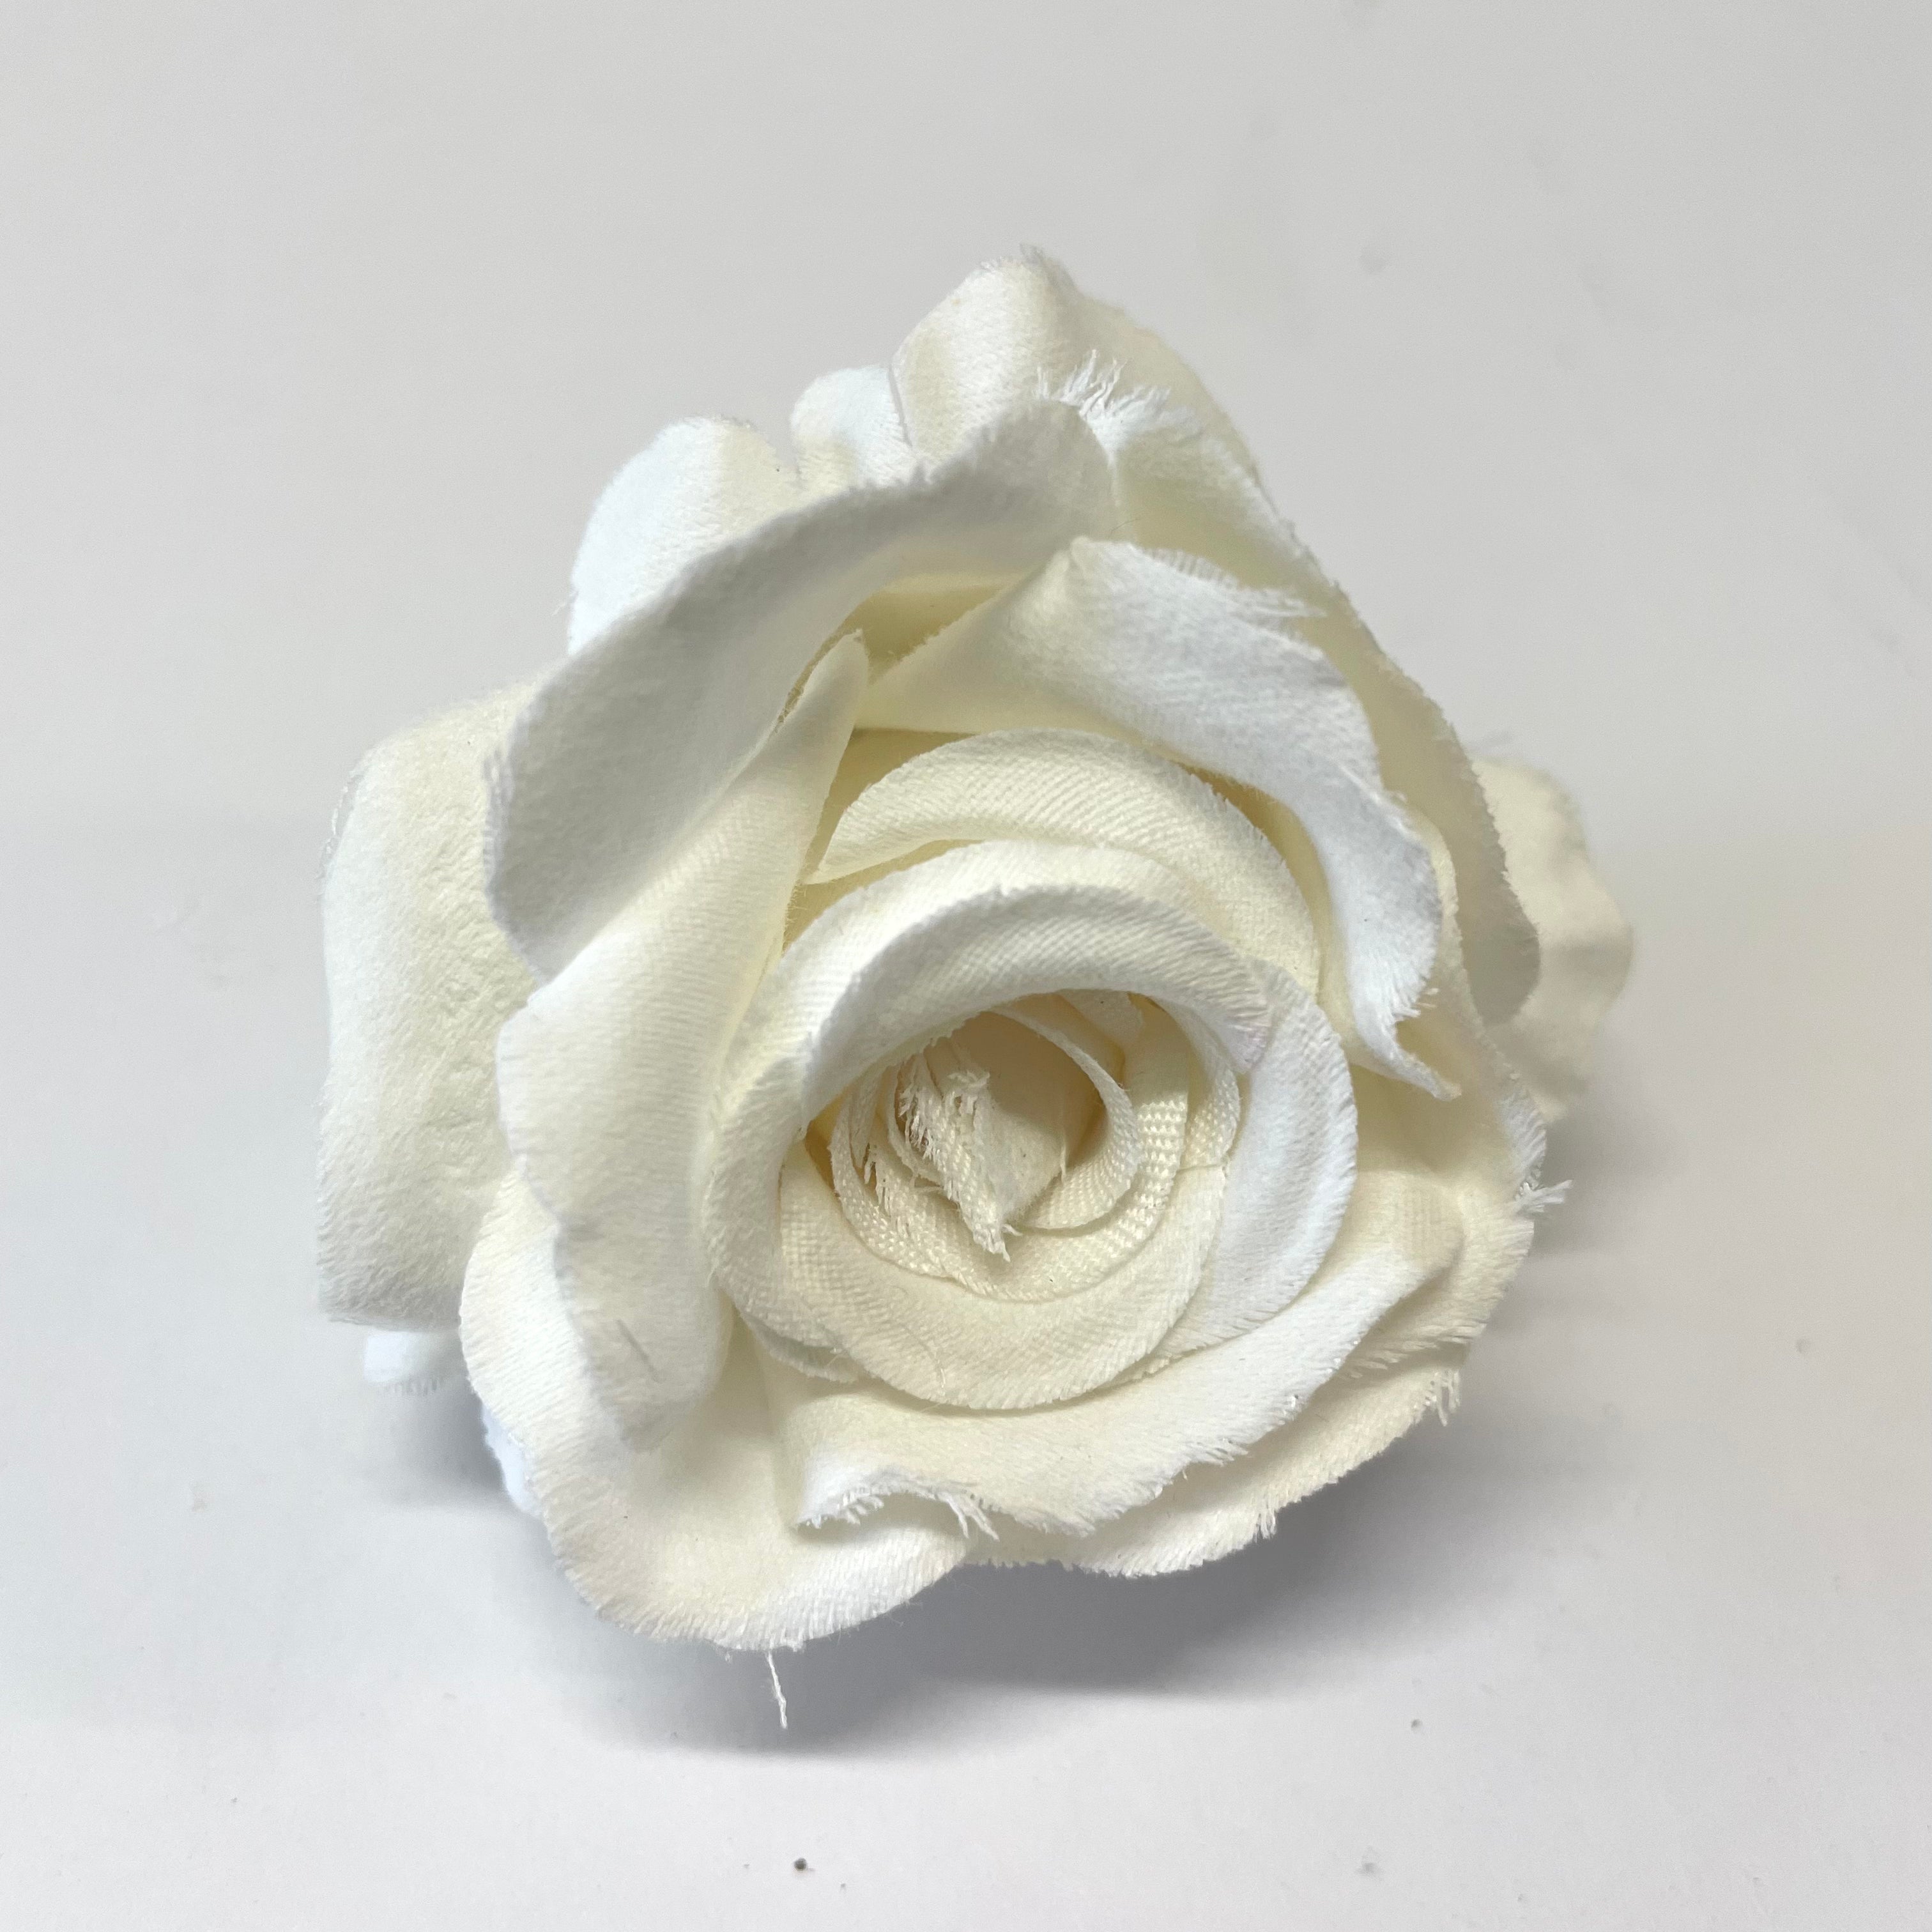 Artificial Silk Flower Head - White Rose Style 129 - 1pc